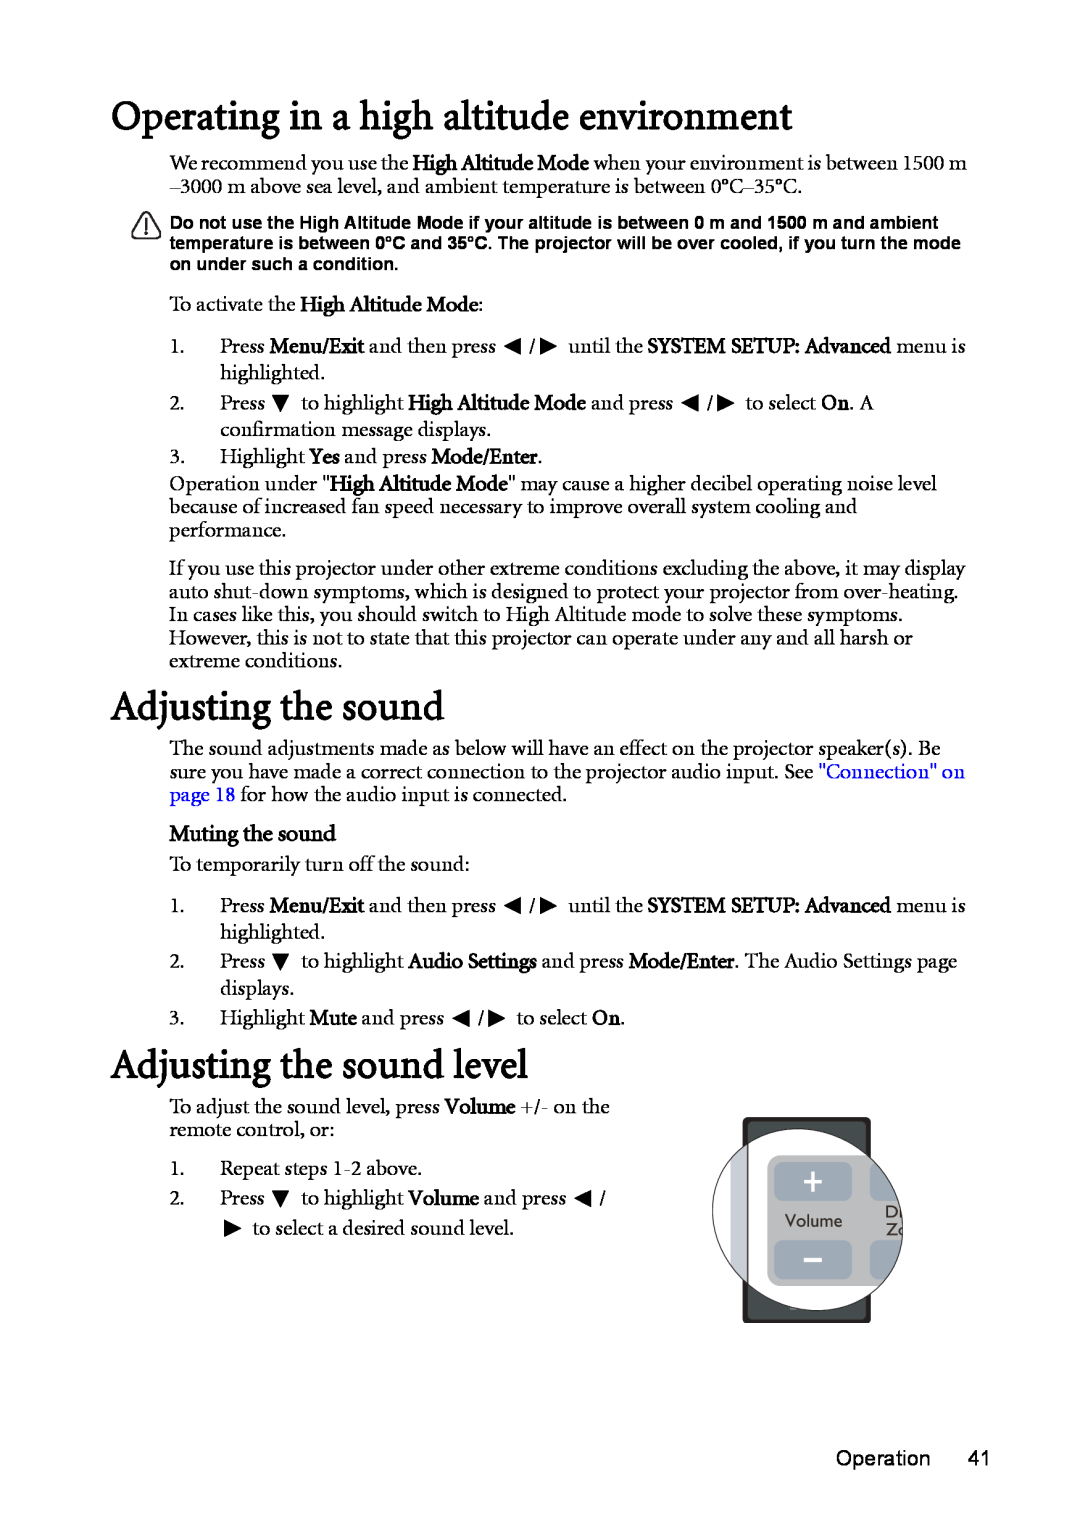 BenQ MX511 user manual Operating in a high altitude environment, Adjusting the sound level, Muting the sound 